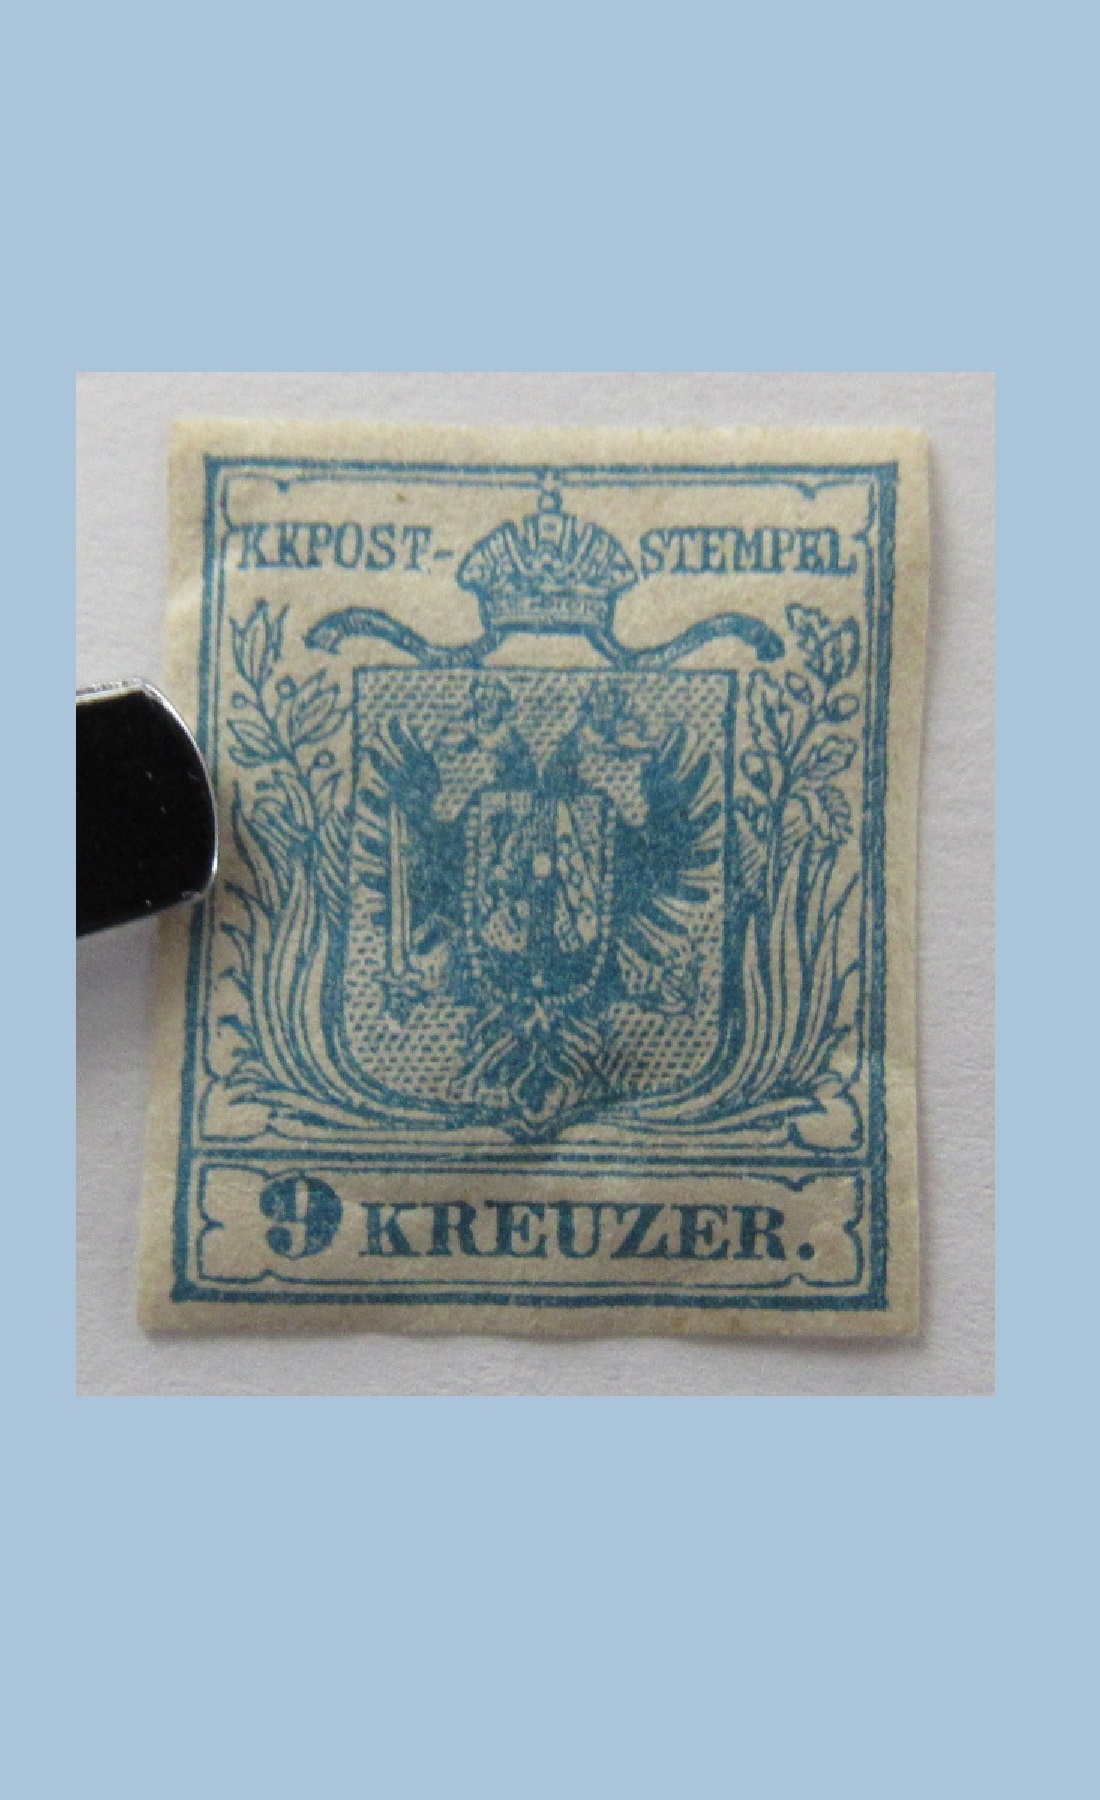 Postage Stamp 9 Kreuzer of The Austrian Monarchy 1850 | Ouslet Auction